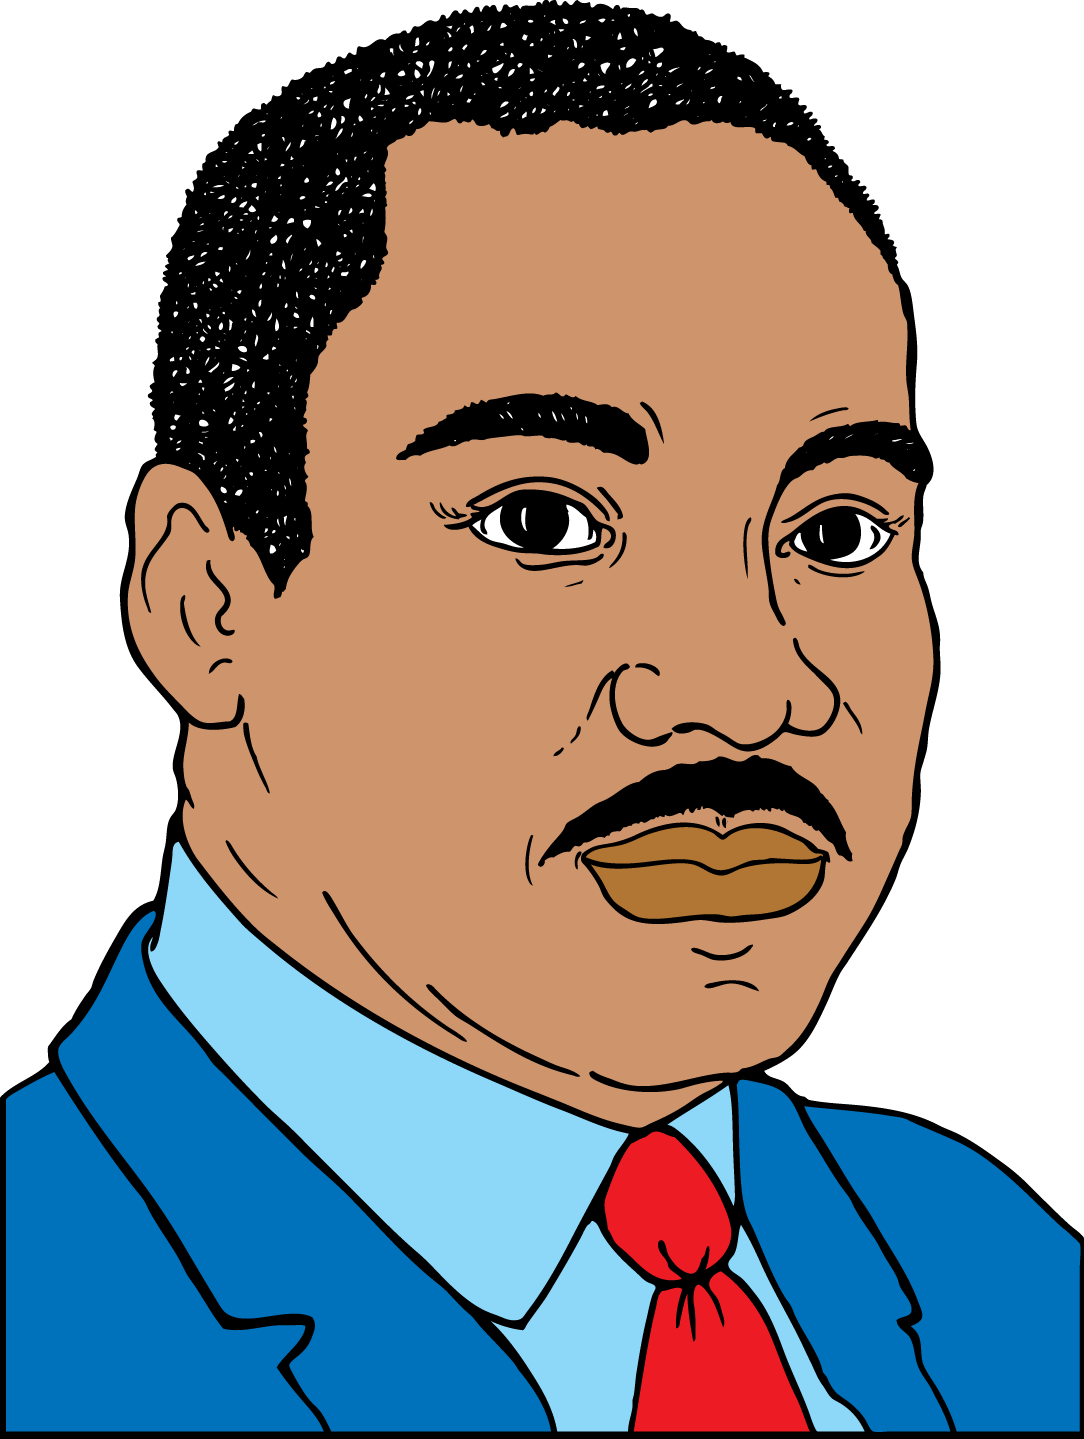 Martin Luther King Cartoon Clipart - Clipartster